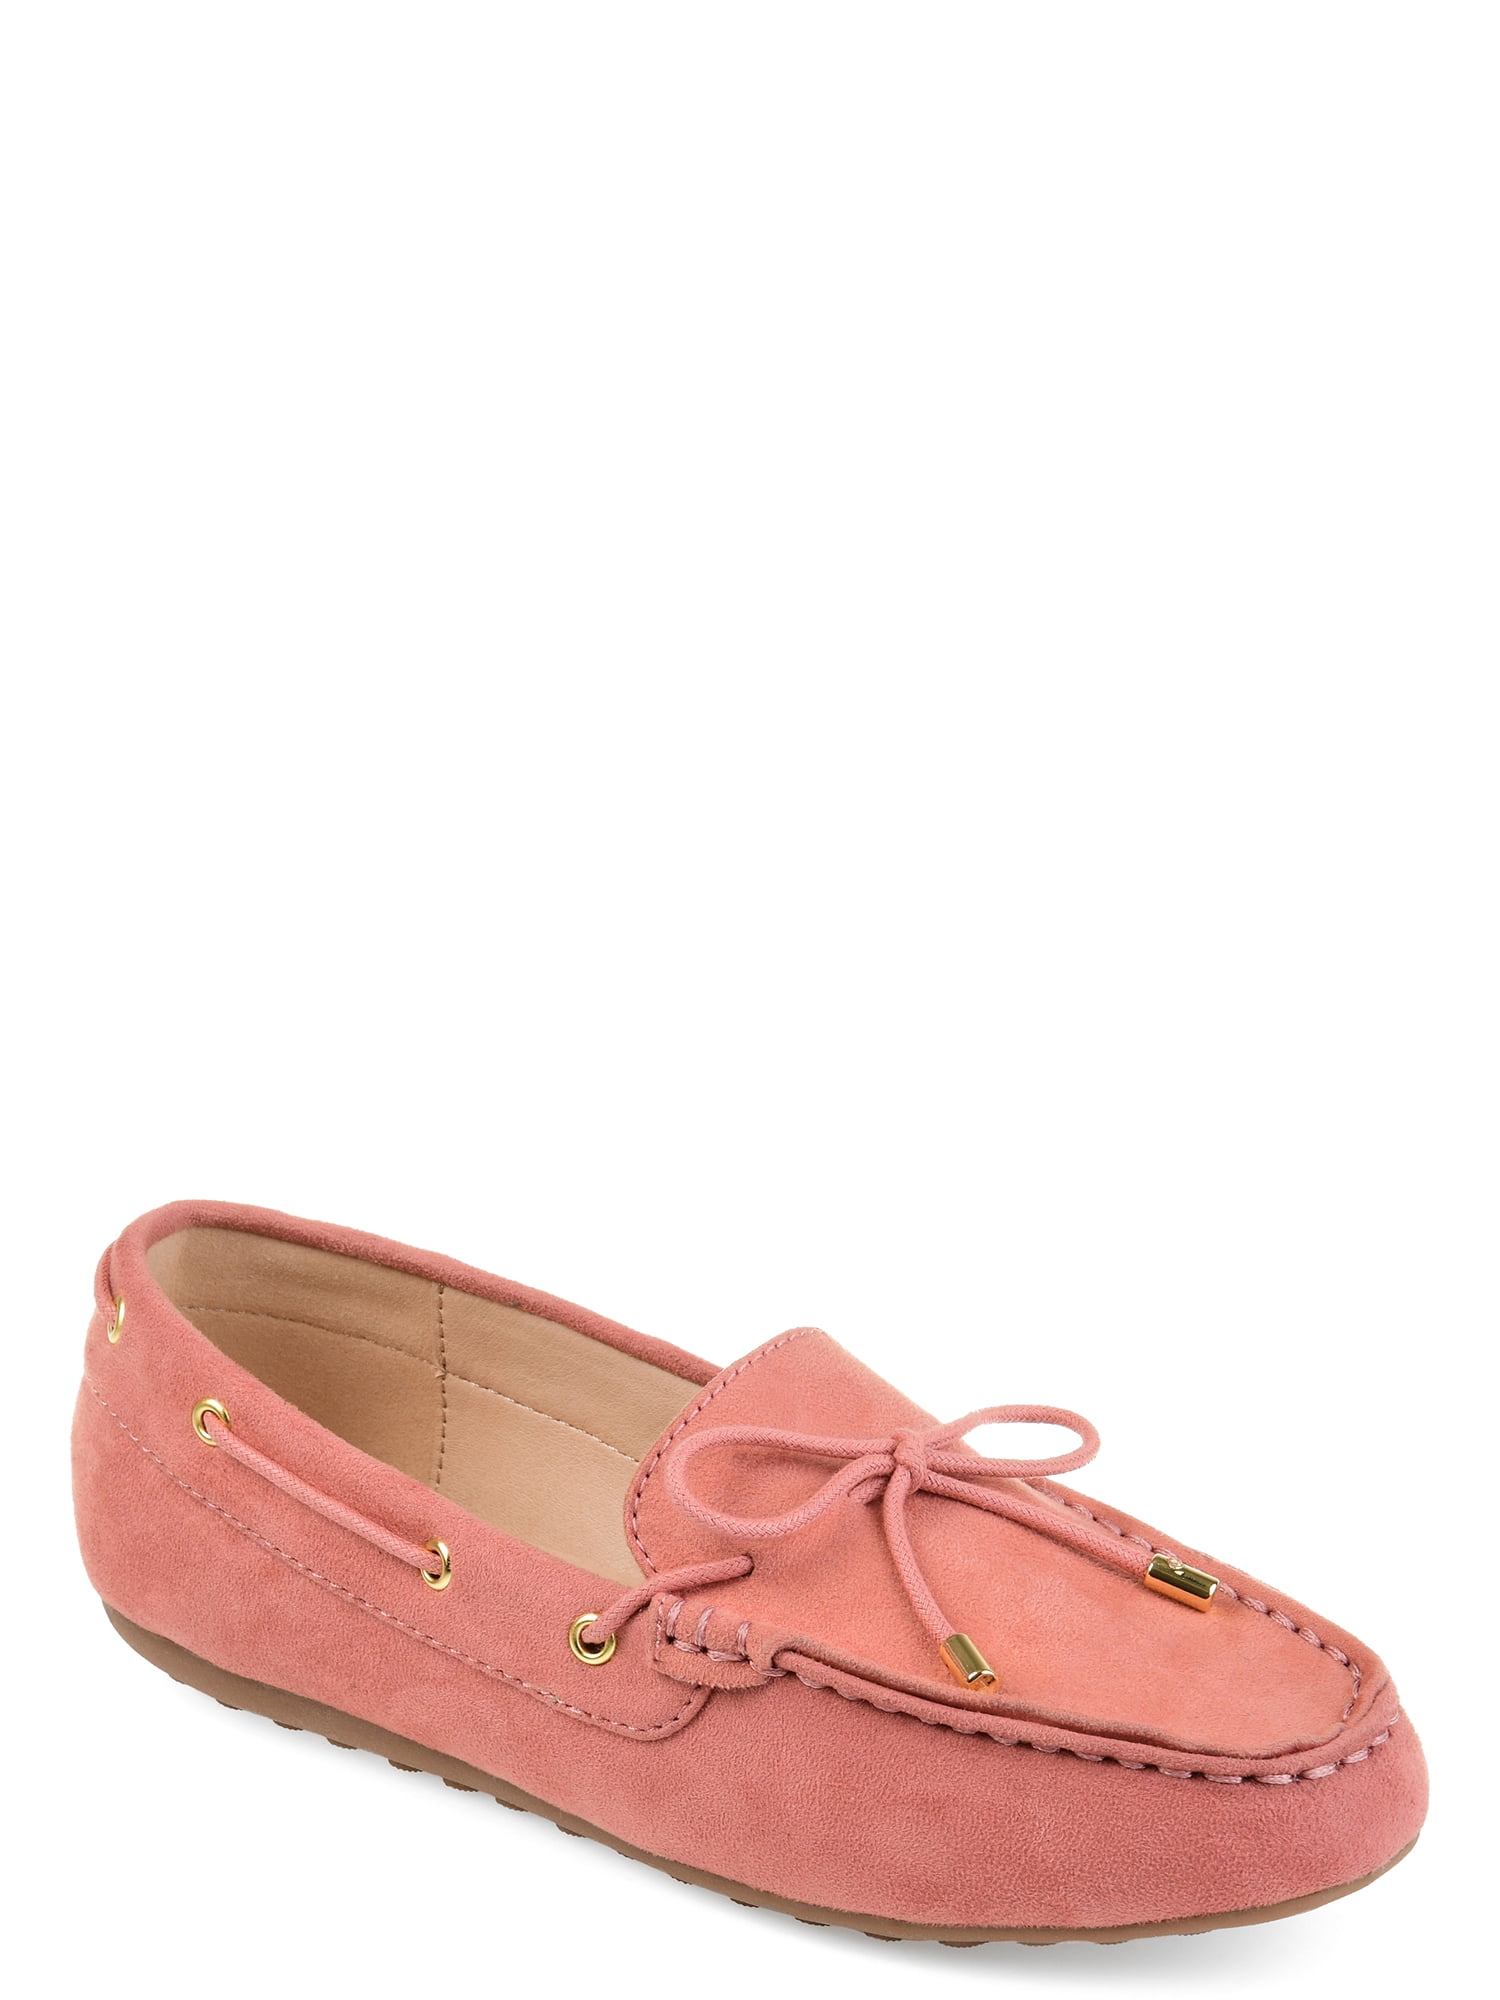 Brinley Co. Womens Comfort-sole Faux Suede Slip-on Loafers - Walmart.com